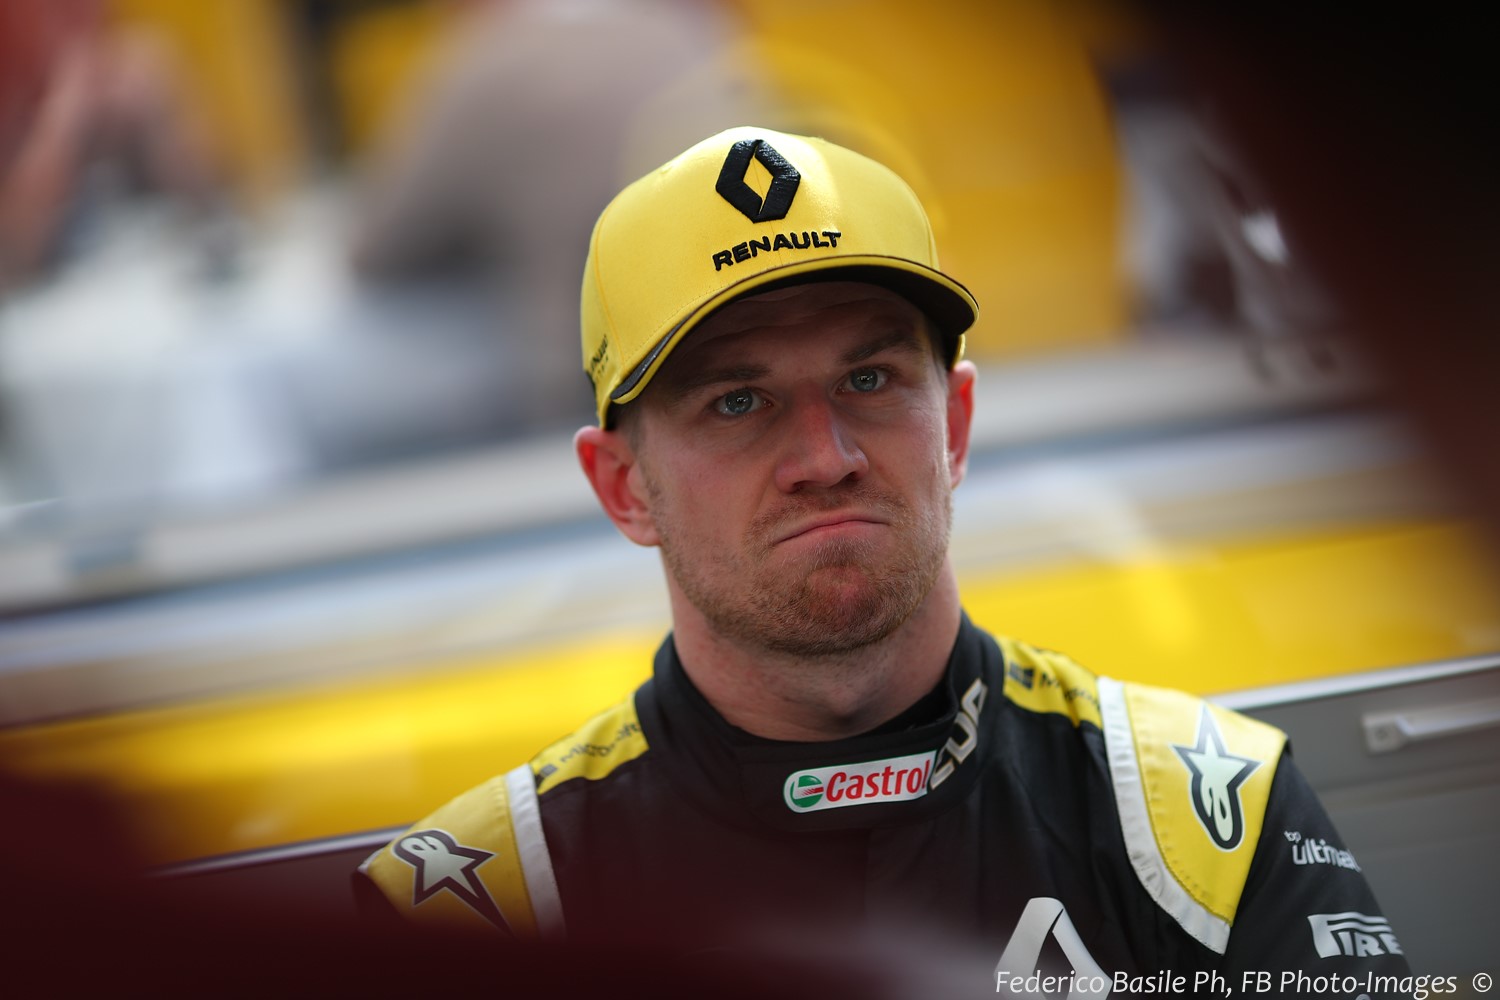 Nico Hulkenberg - dumped by Renault, not a single F1 podium in his career - a perfect fit for the anti-American Haas team